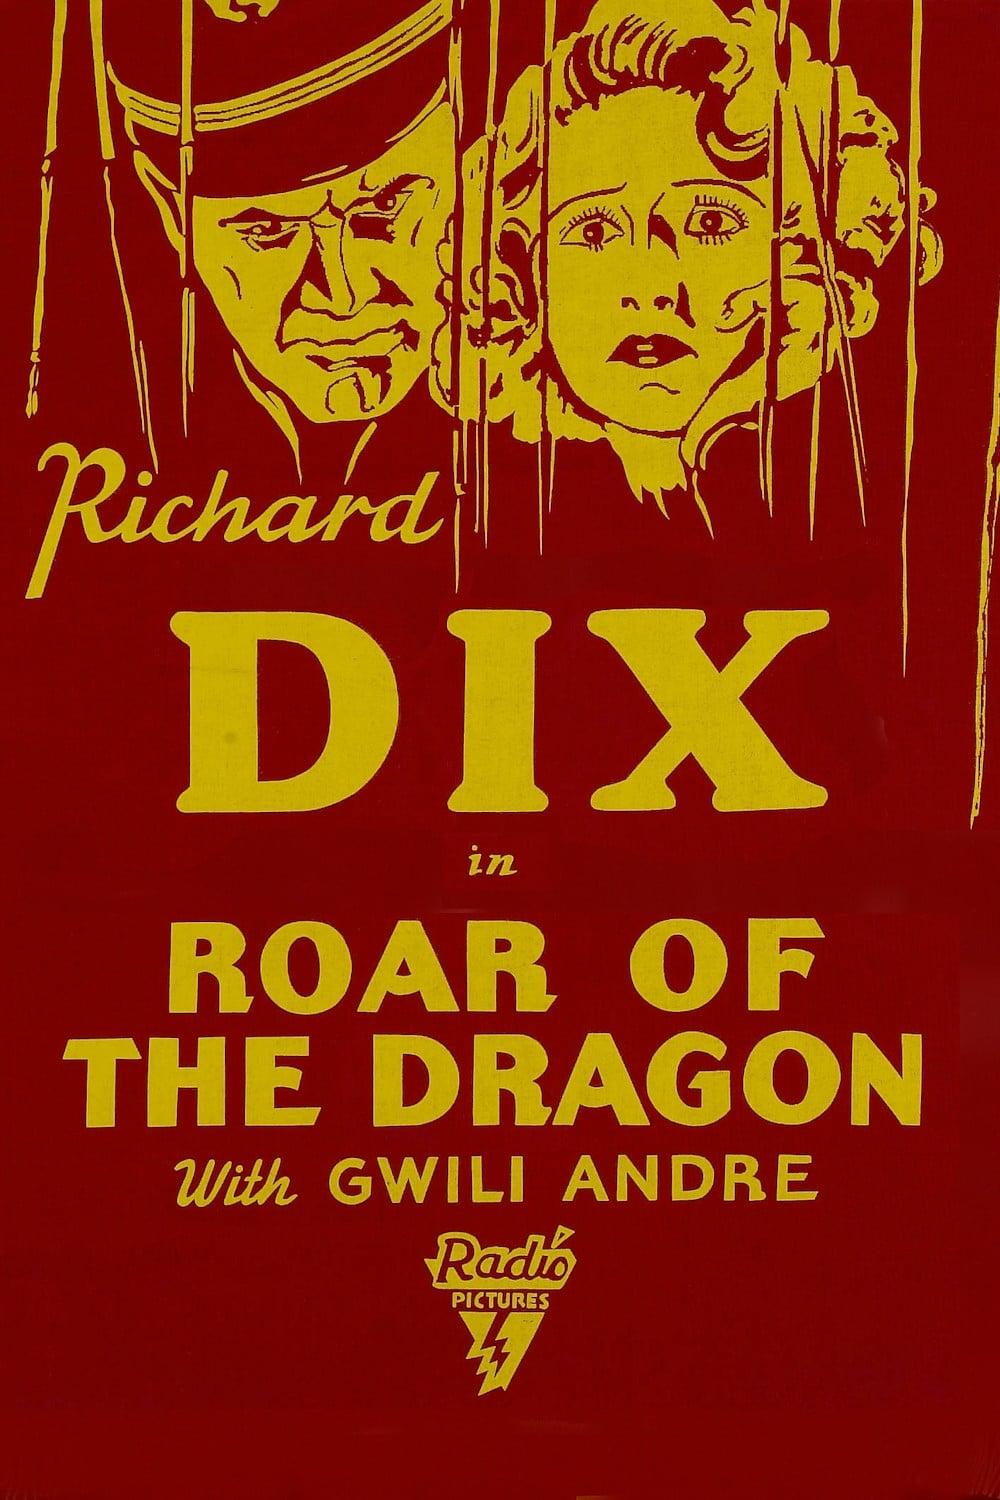 Roar of the Dragon poster